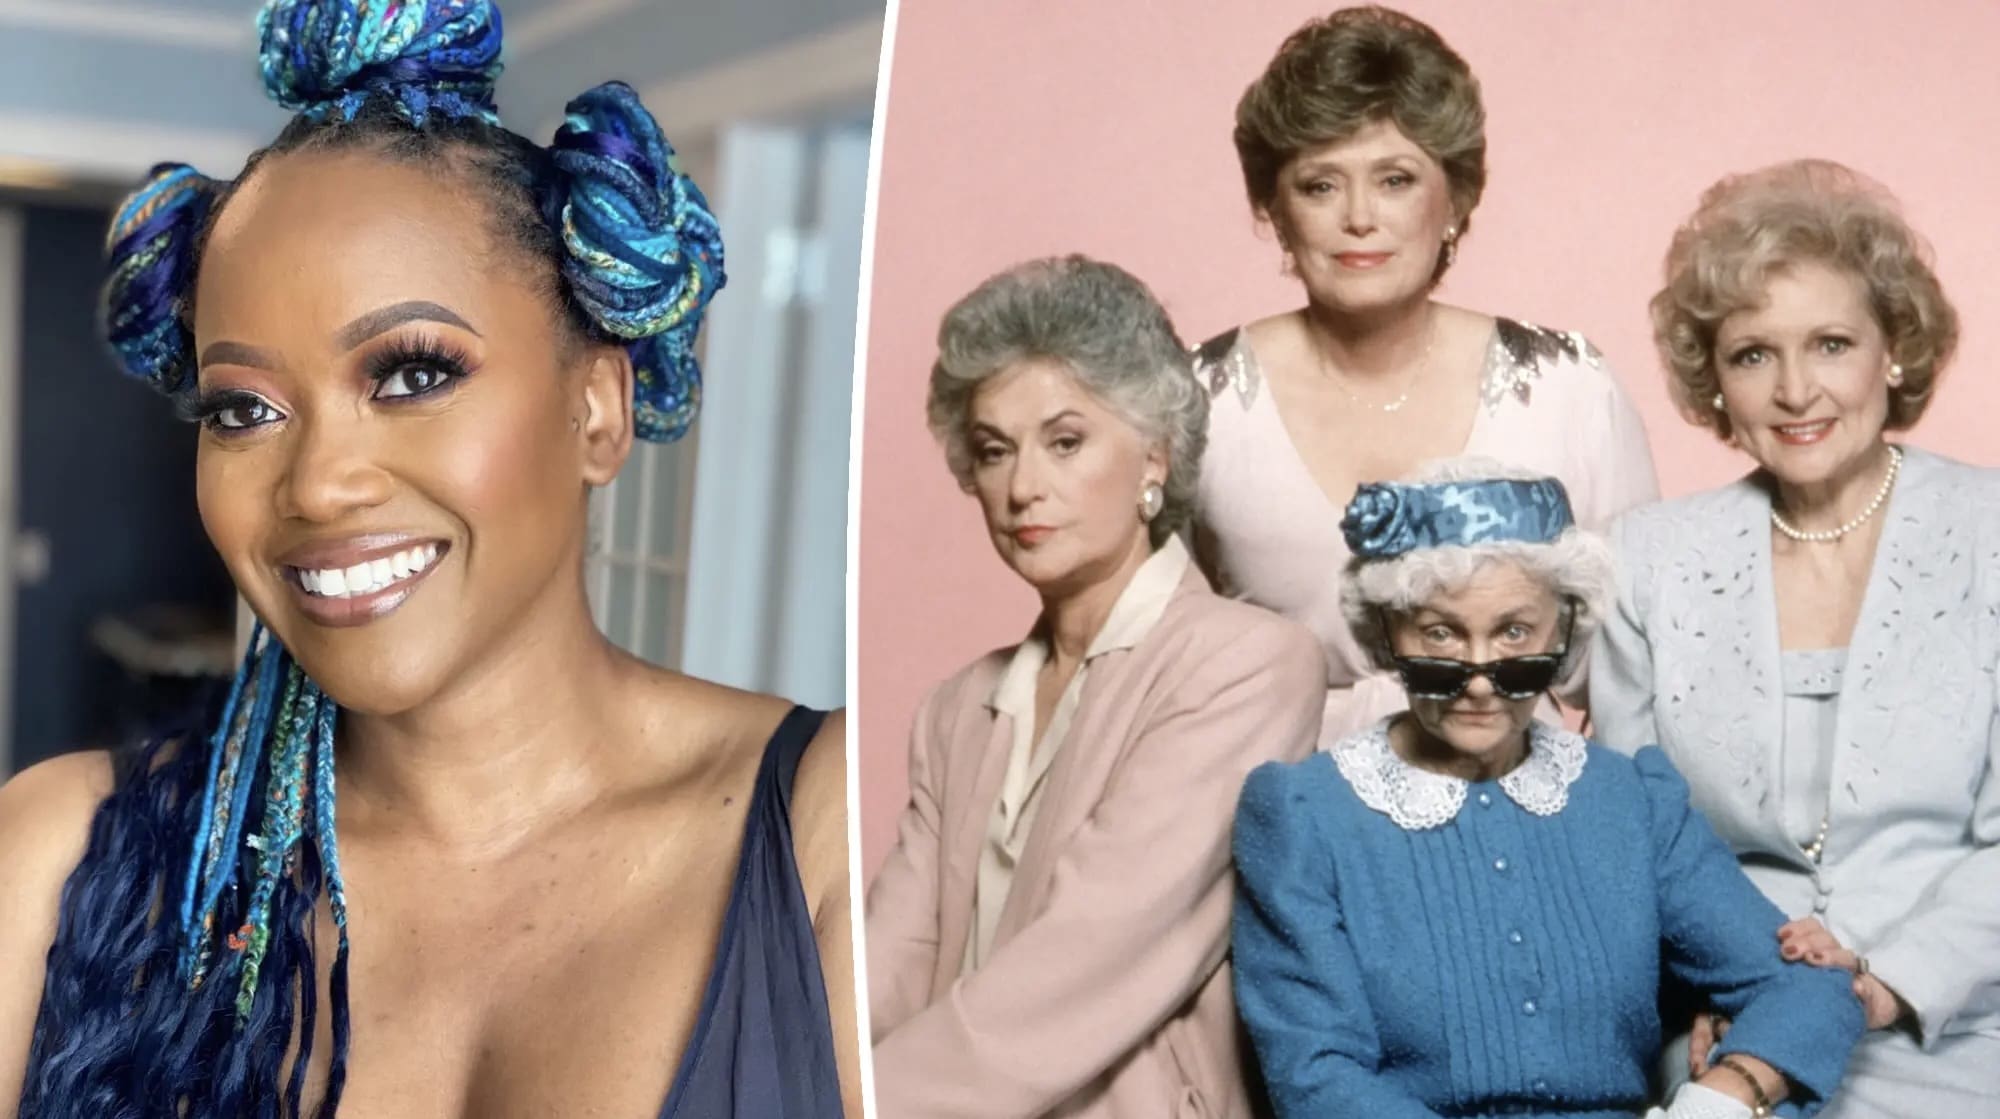 Erika Alexander Credits the ‘The Golden Girls’ for Influencing Her ‘90s Hit, ‘Living Single’